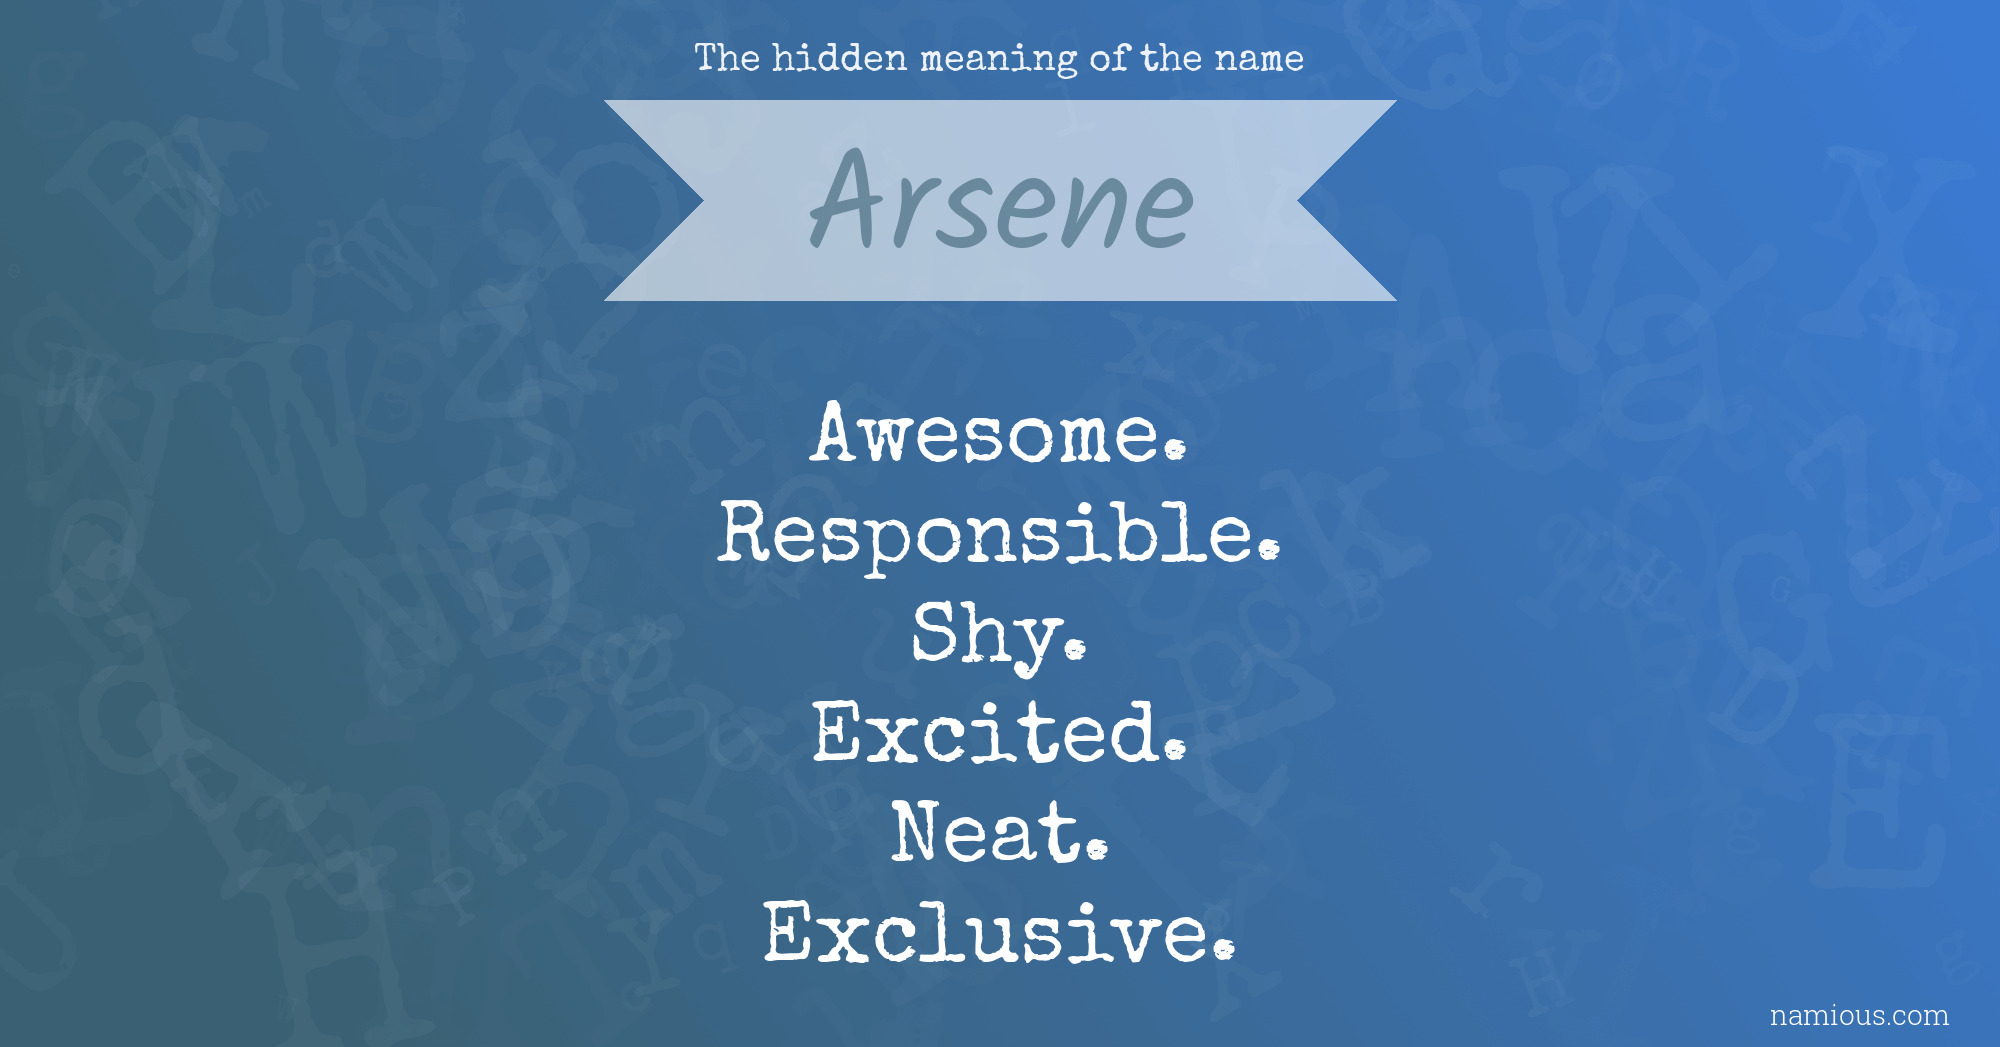 The hidden meaning of the name Arsene